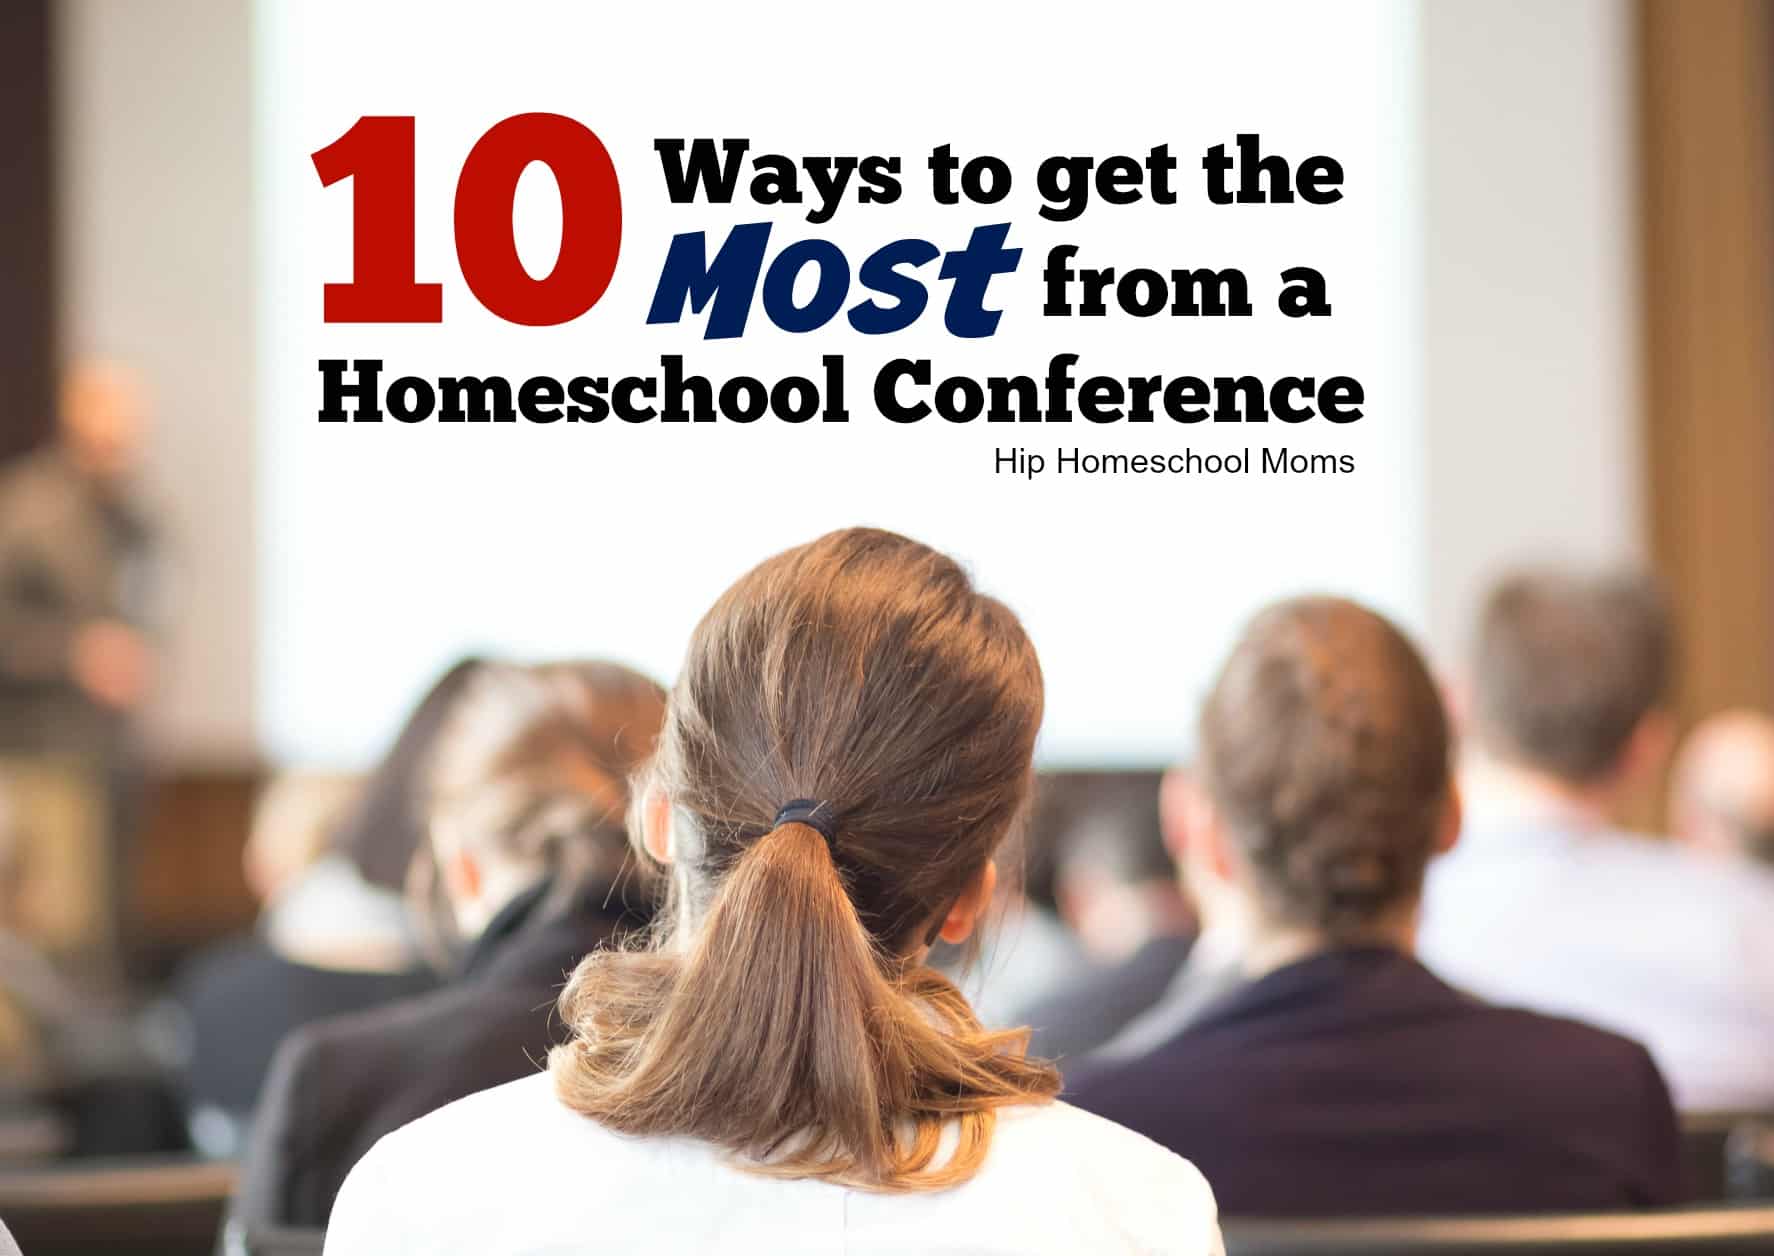 10 Ways to Get the Most from a Homeschool Conference